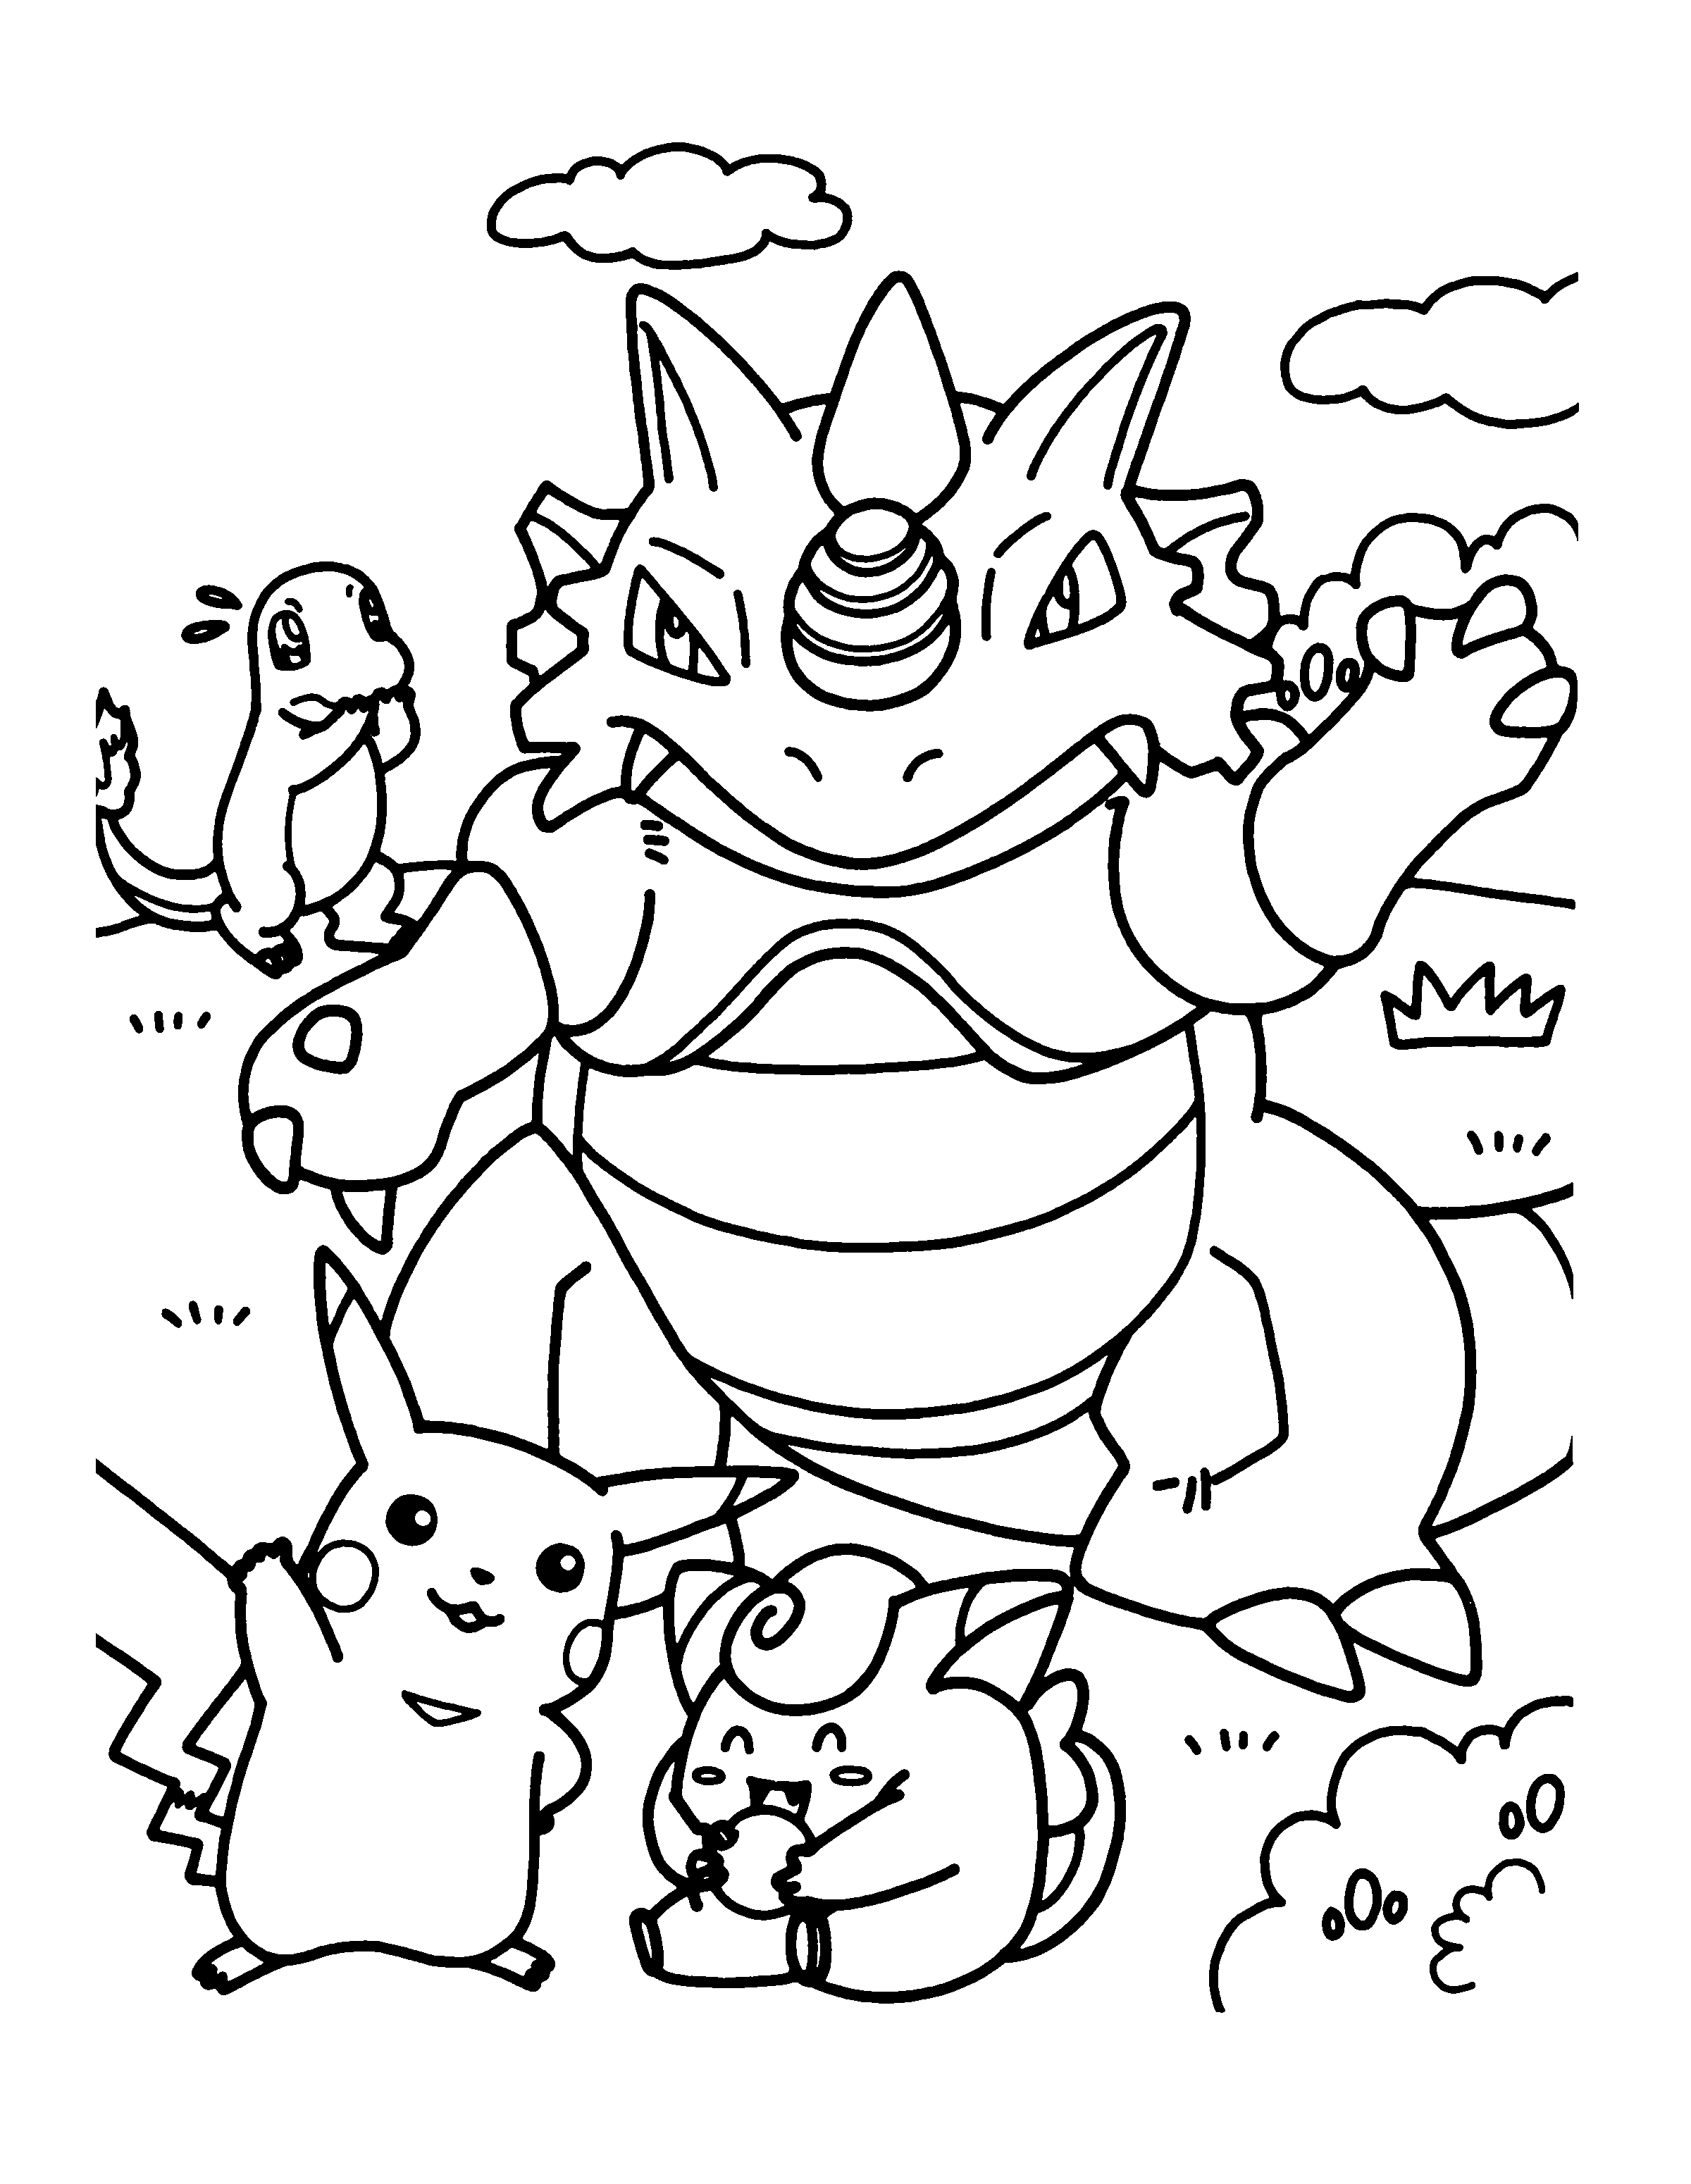 Simple Pokemon coloring page for kids